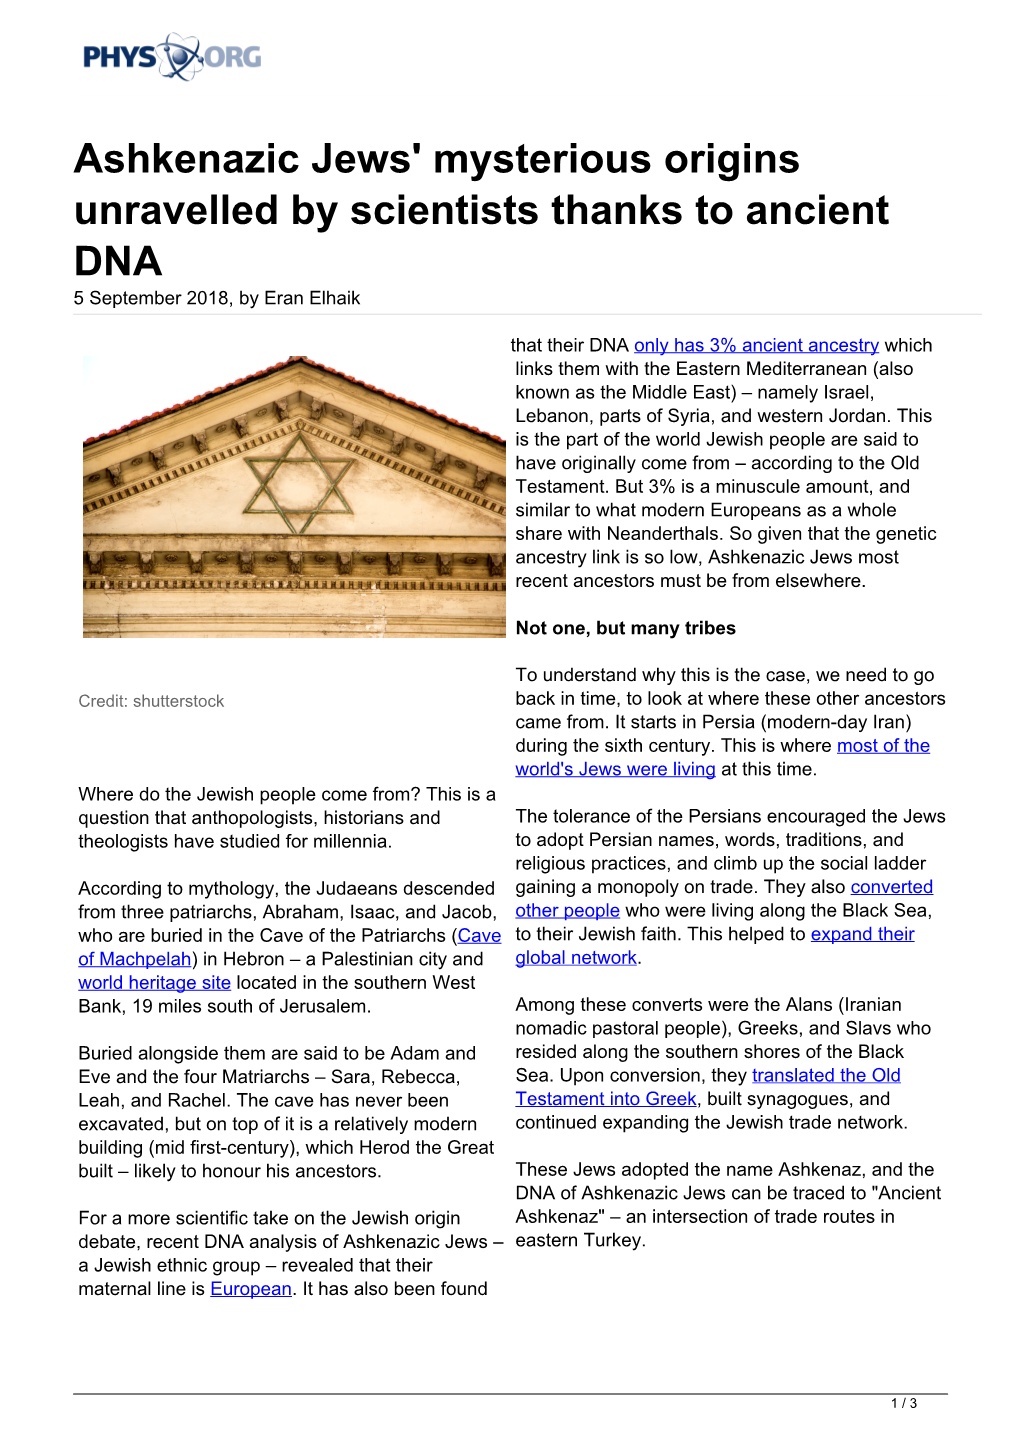 Ashkenazic Jews' Mysterious Origins Unravelled by Scientists Thanks to Ancient DNA 5 September 2018, by Eran Elhaik